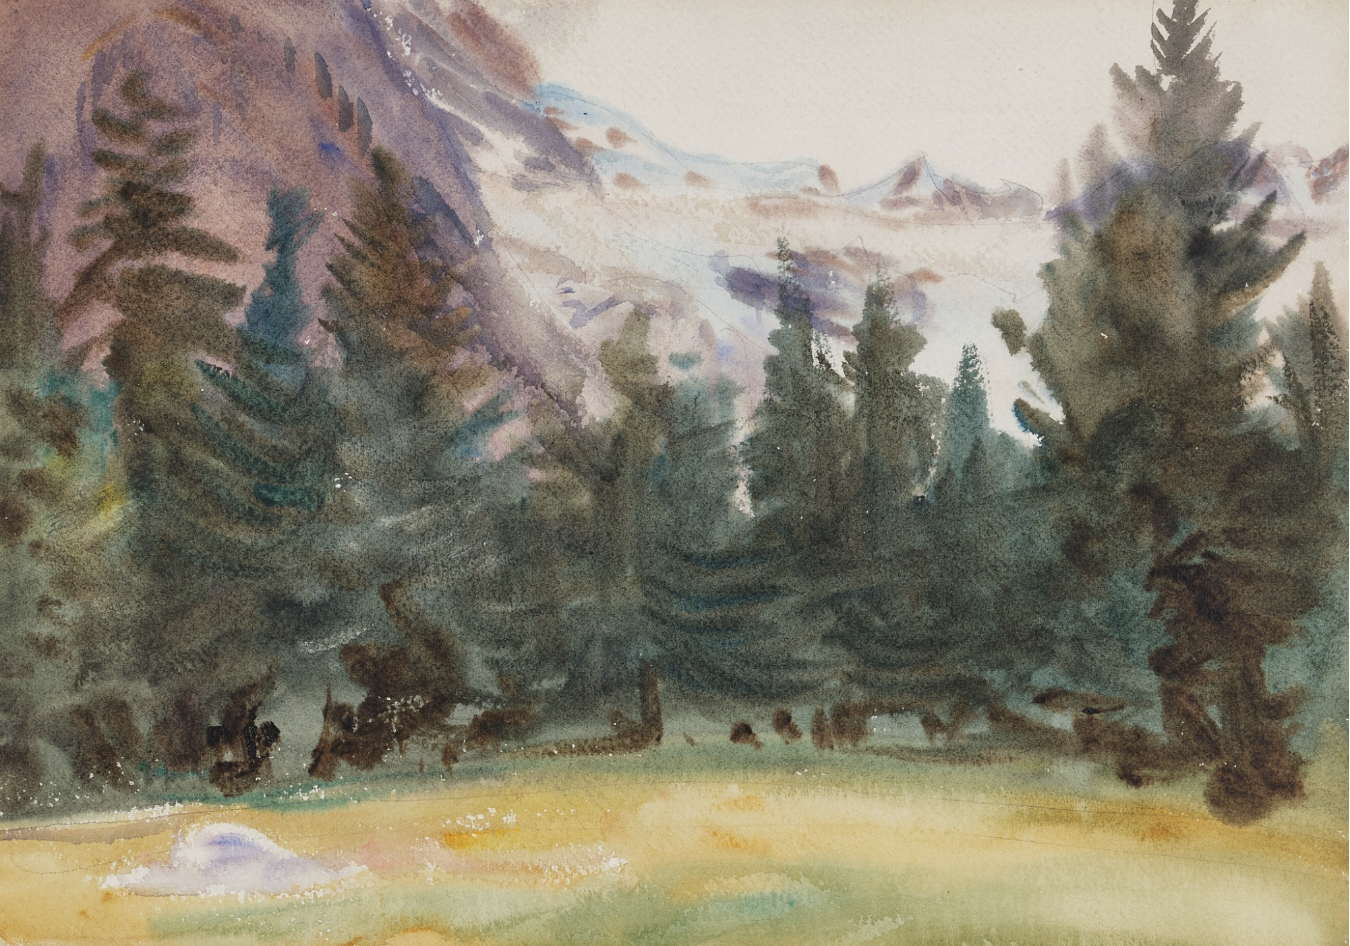 A mountain range with a glacial cap and pine trees in a circle painted in watercolor.